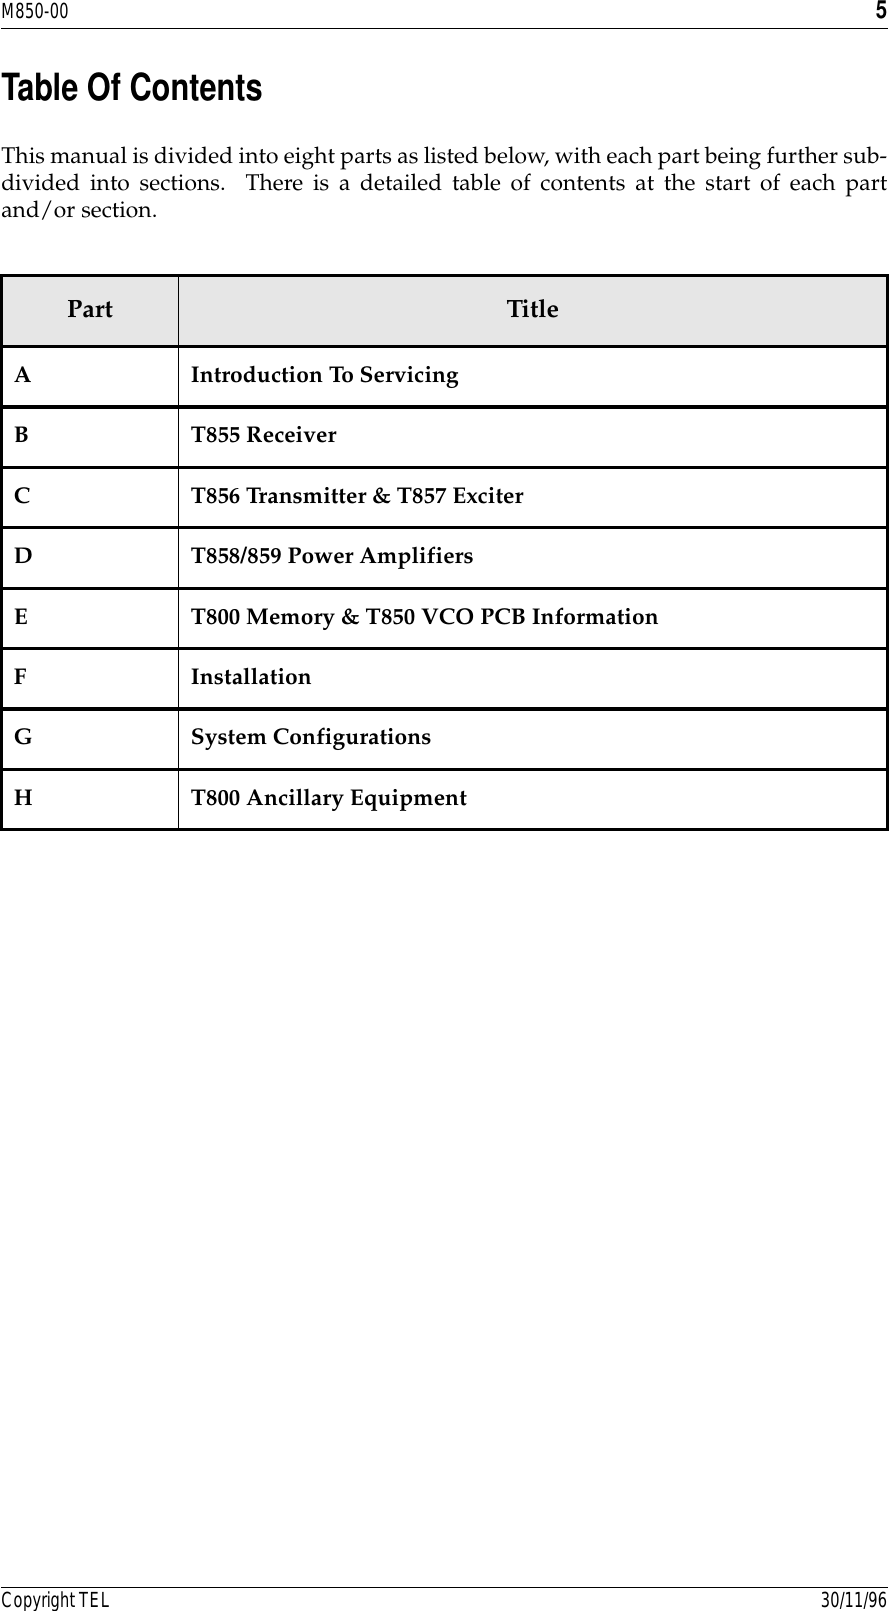 Page 5 of 12 - M850-00-101 T800/T800 SERIES 1 MANUALS/M850-00-101/Pages 1-12 Pages